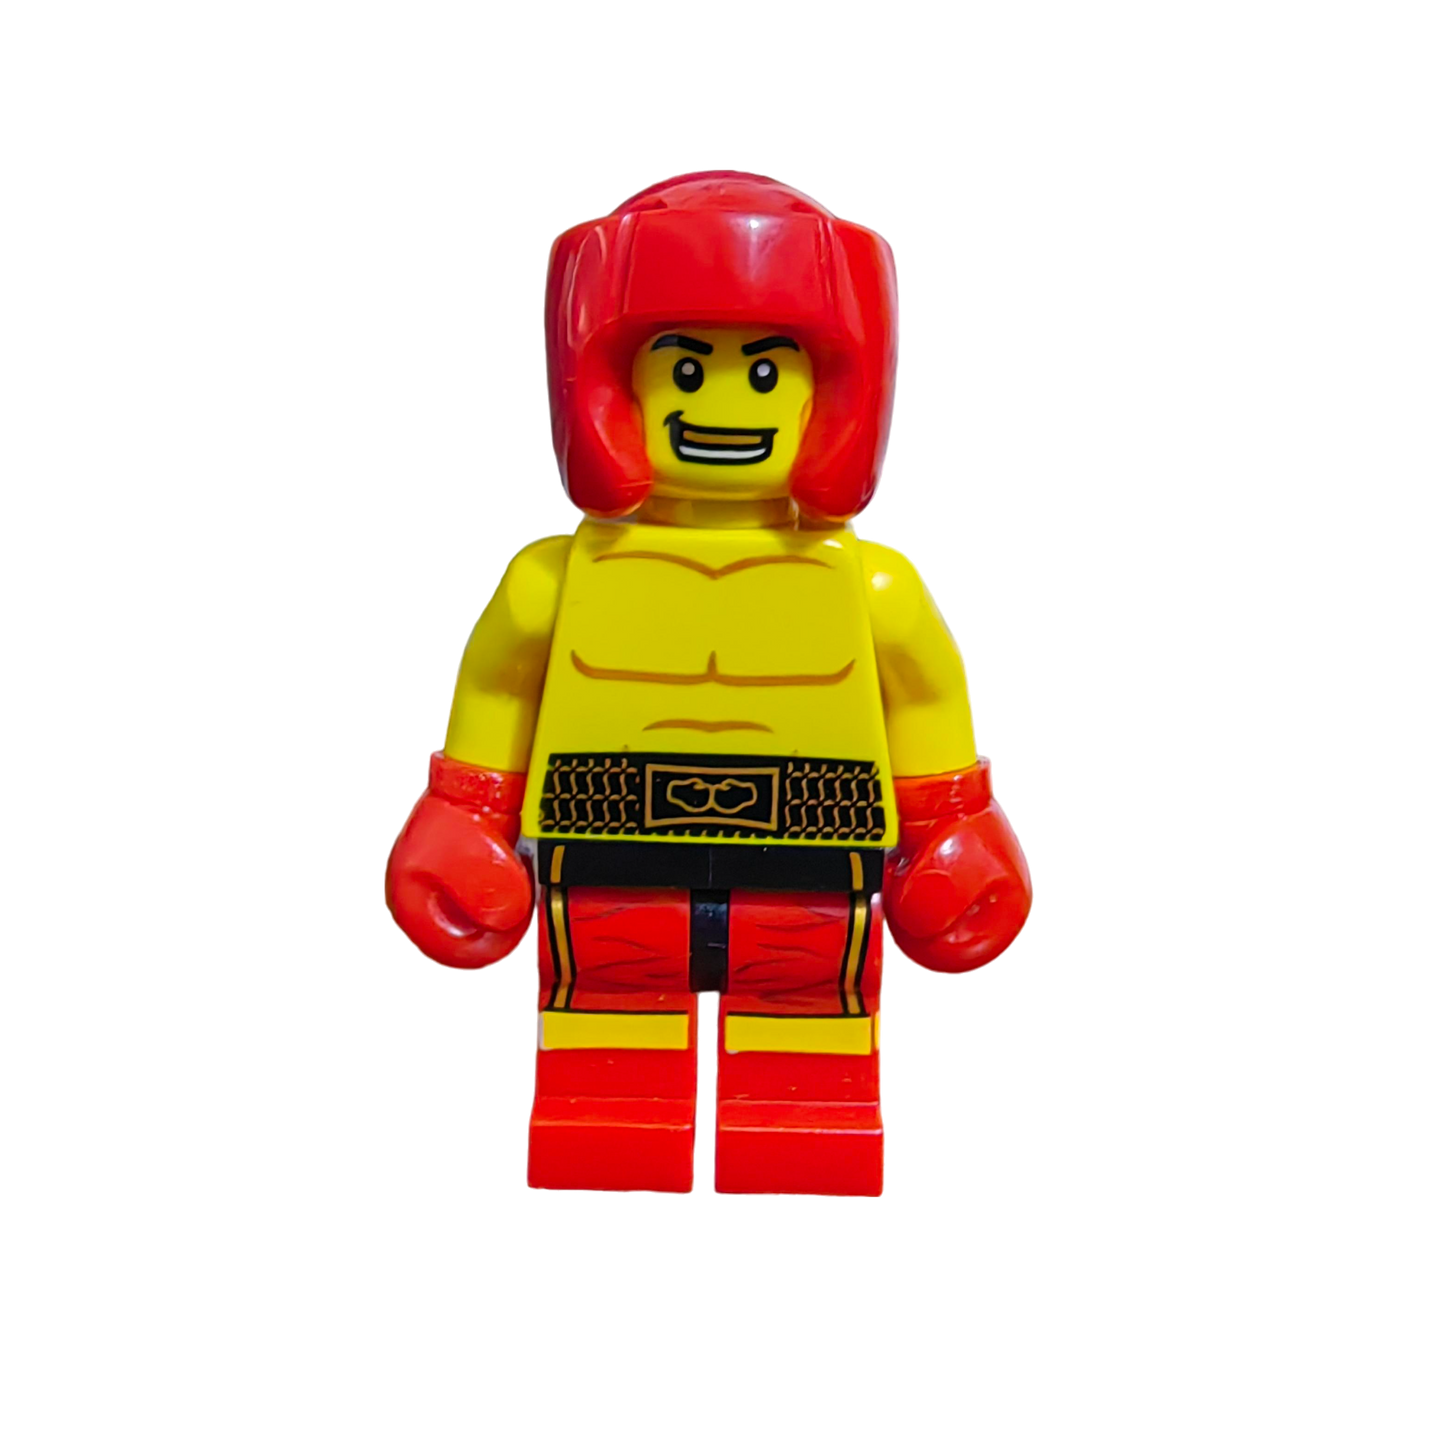 Themed Boxer, Personalised Minifigure.